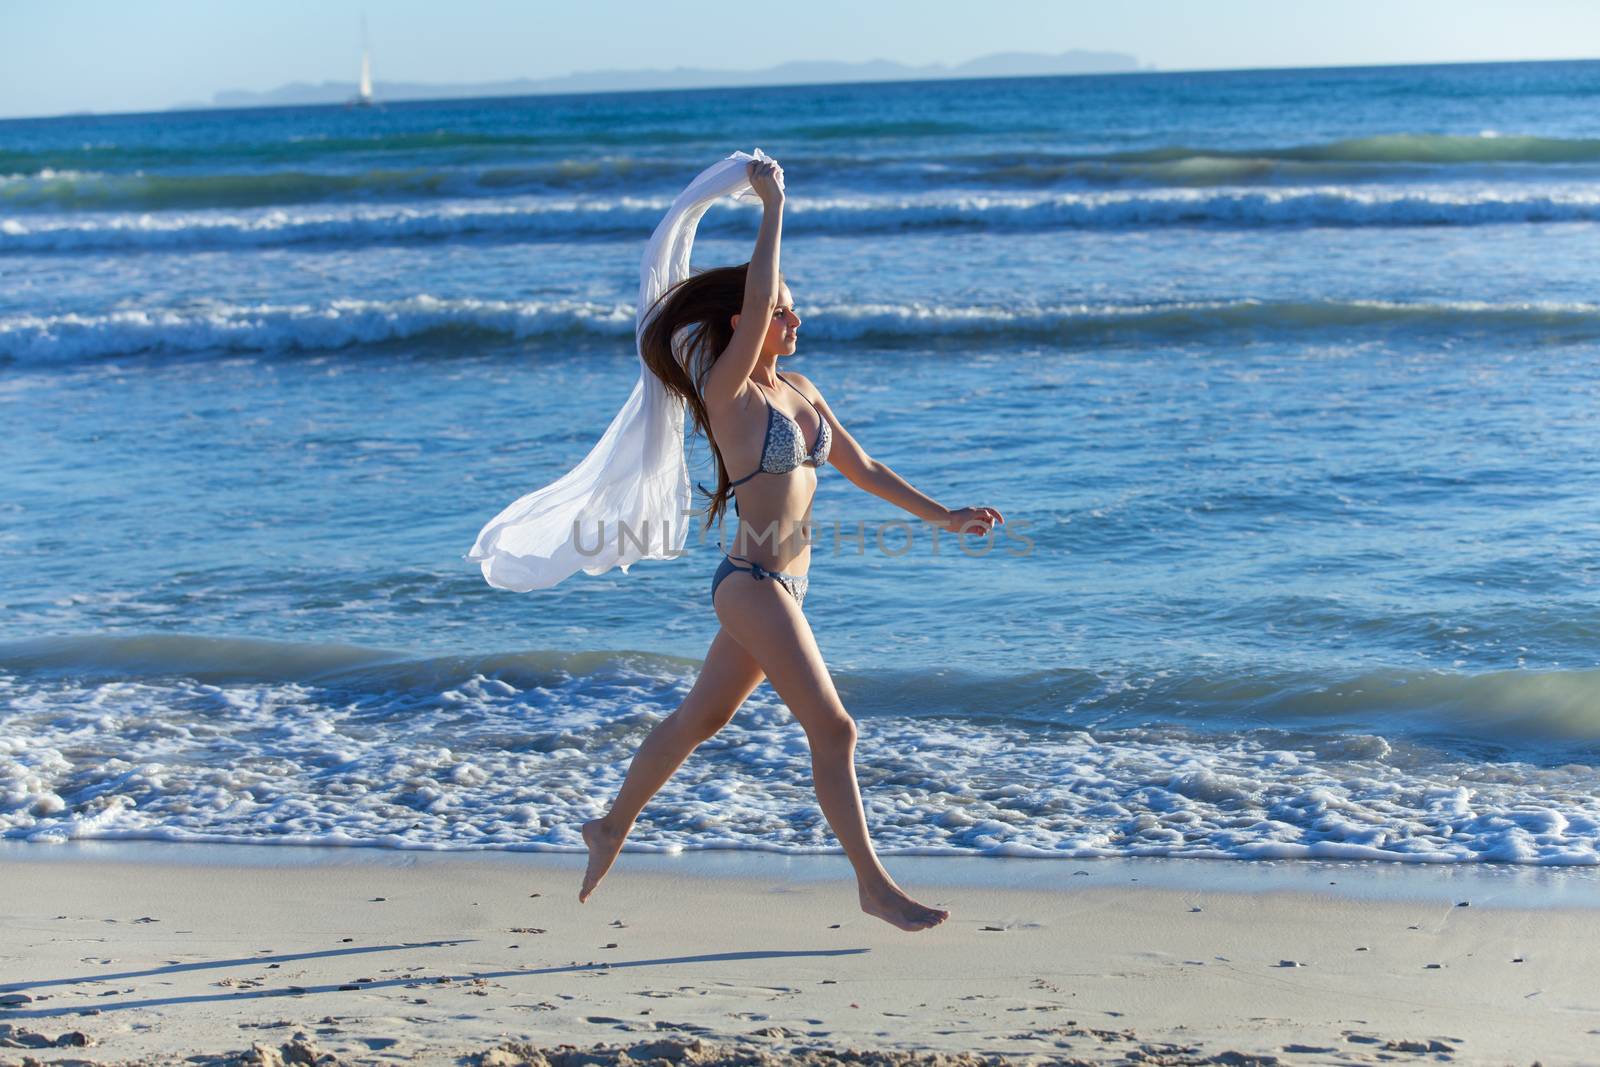 young woman jumping on the beach